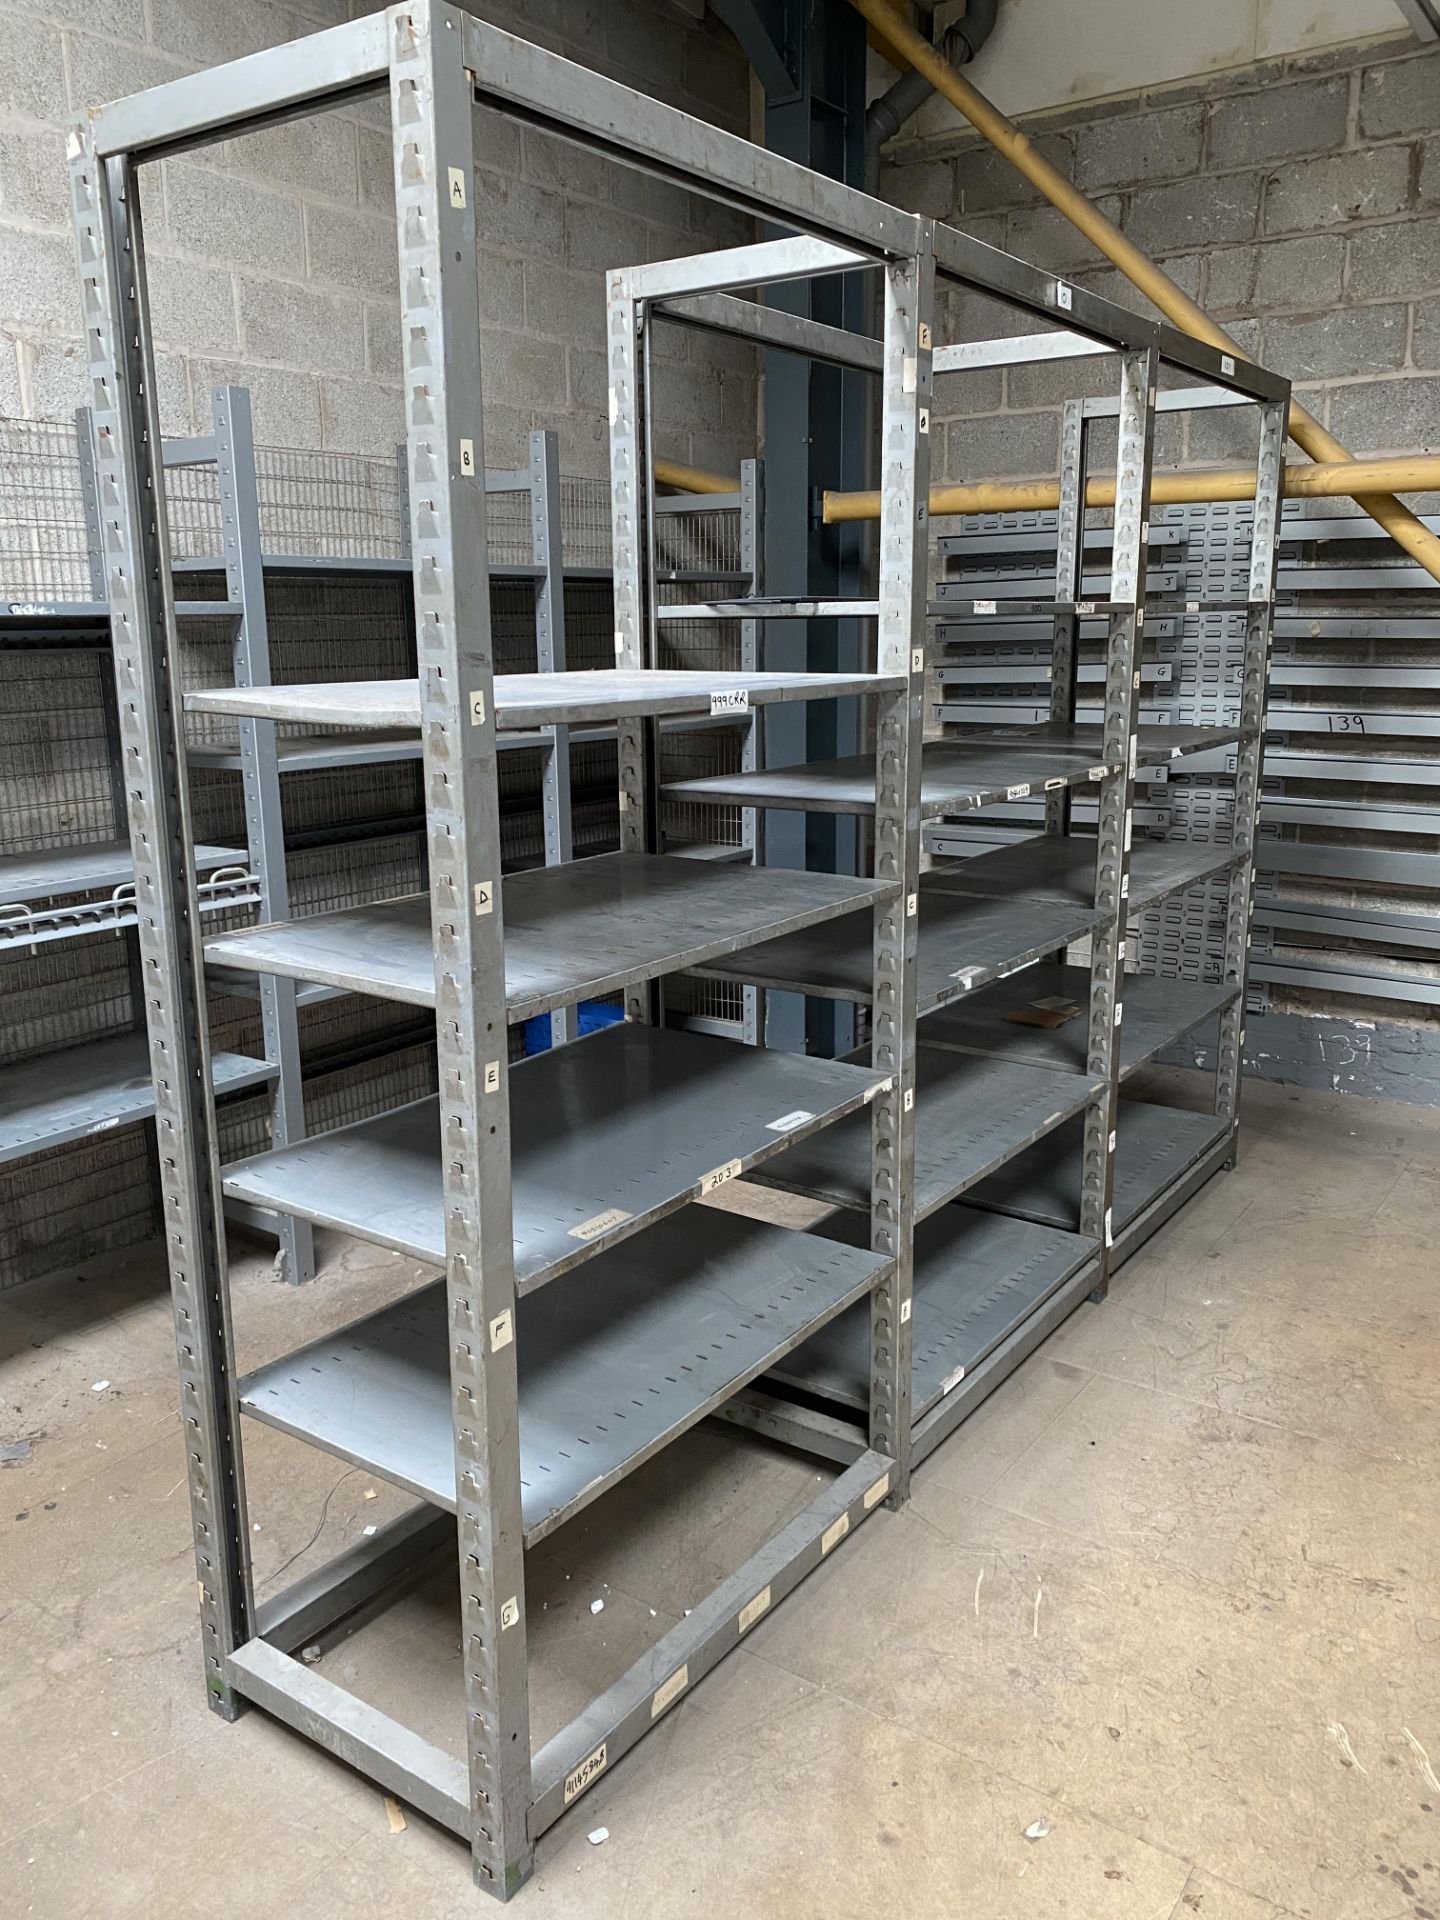 16 x Assorted Bays of Stock Racking with Metal Shelving and a Wall Mounted Storage Bin Holder. - Image 5 of 8